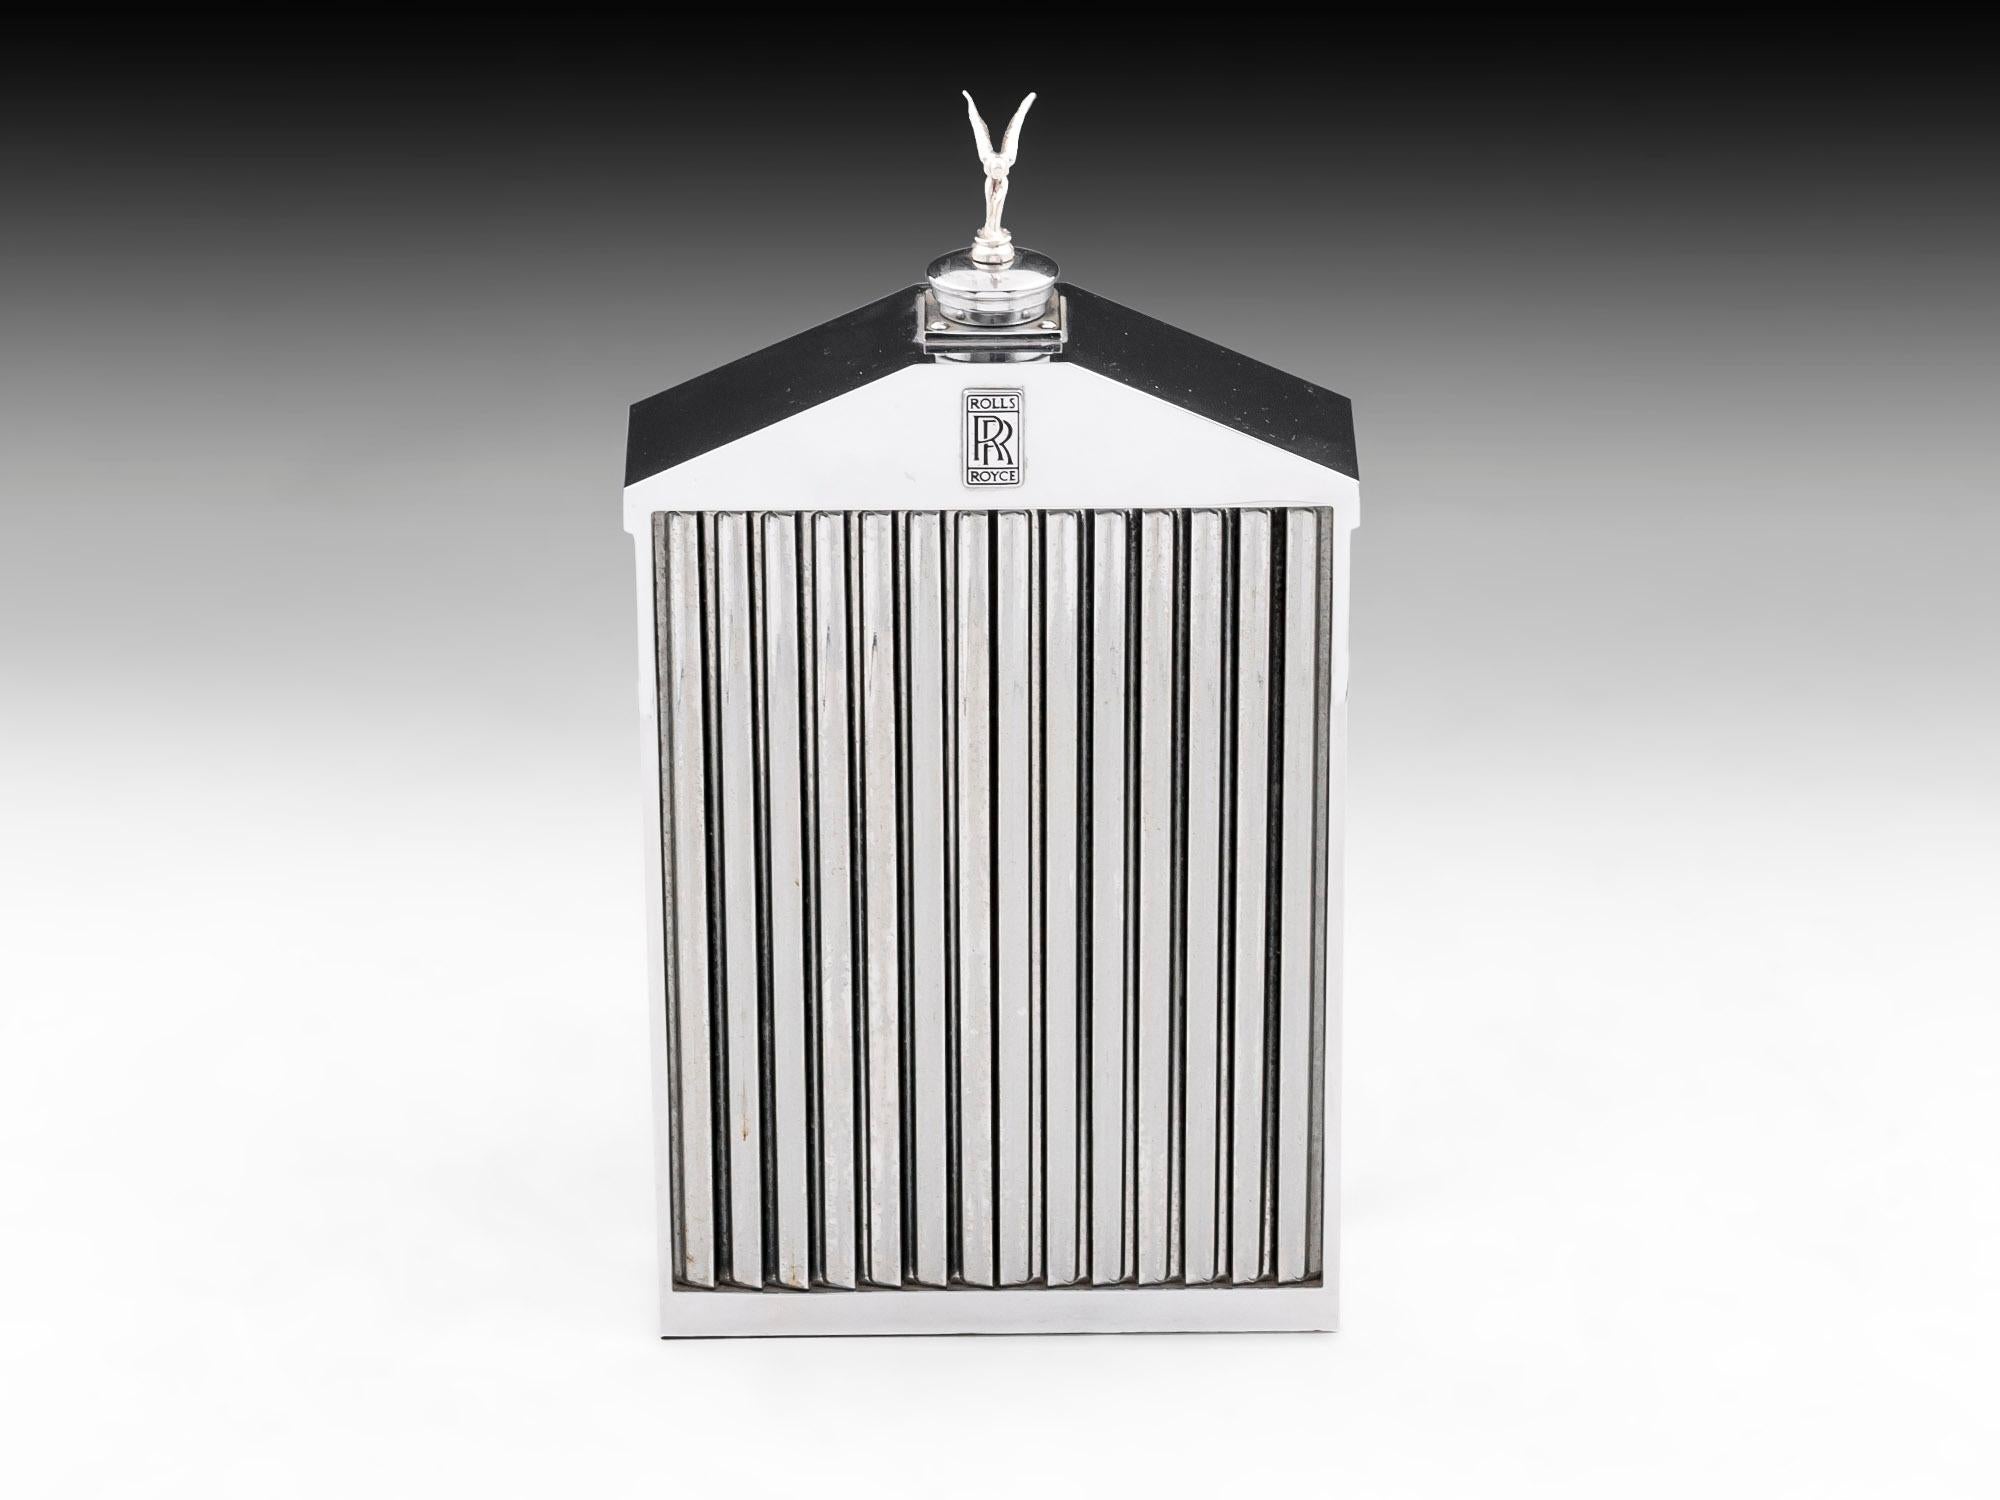 The Rolls Royce Decanter has a heavy chromium-plated finish a sure sign of high quality and surrounds a glass flask. There is a slot in the casing at the rear allowing visibility of the Rolls Royce contents with Baize cloth to the base to protect